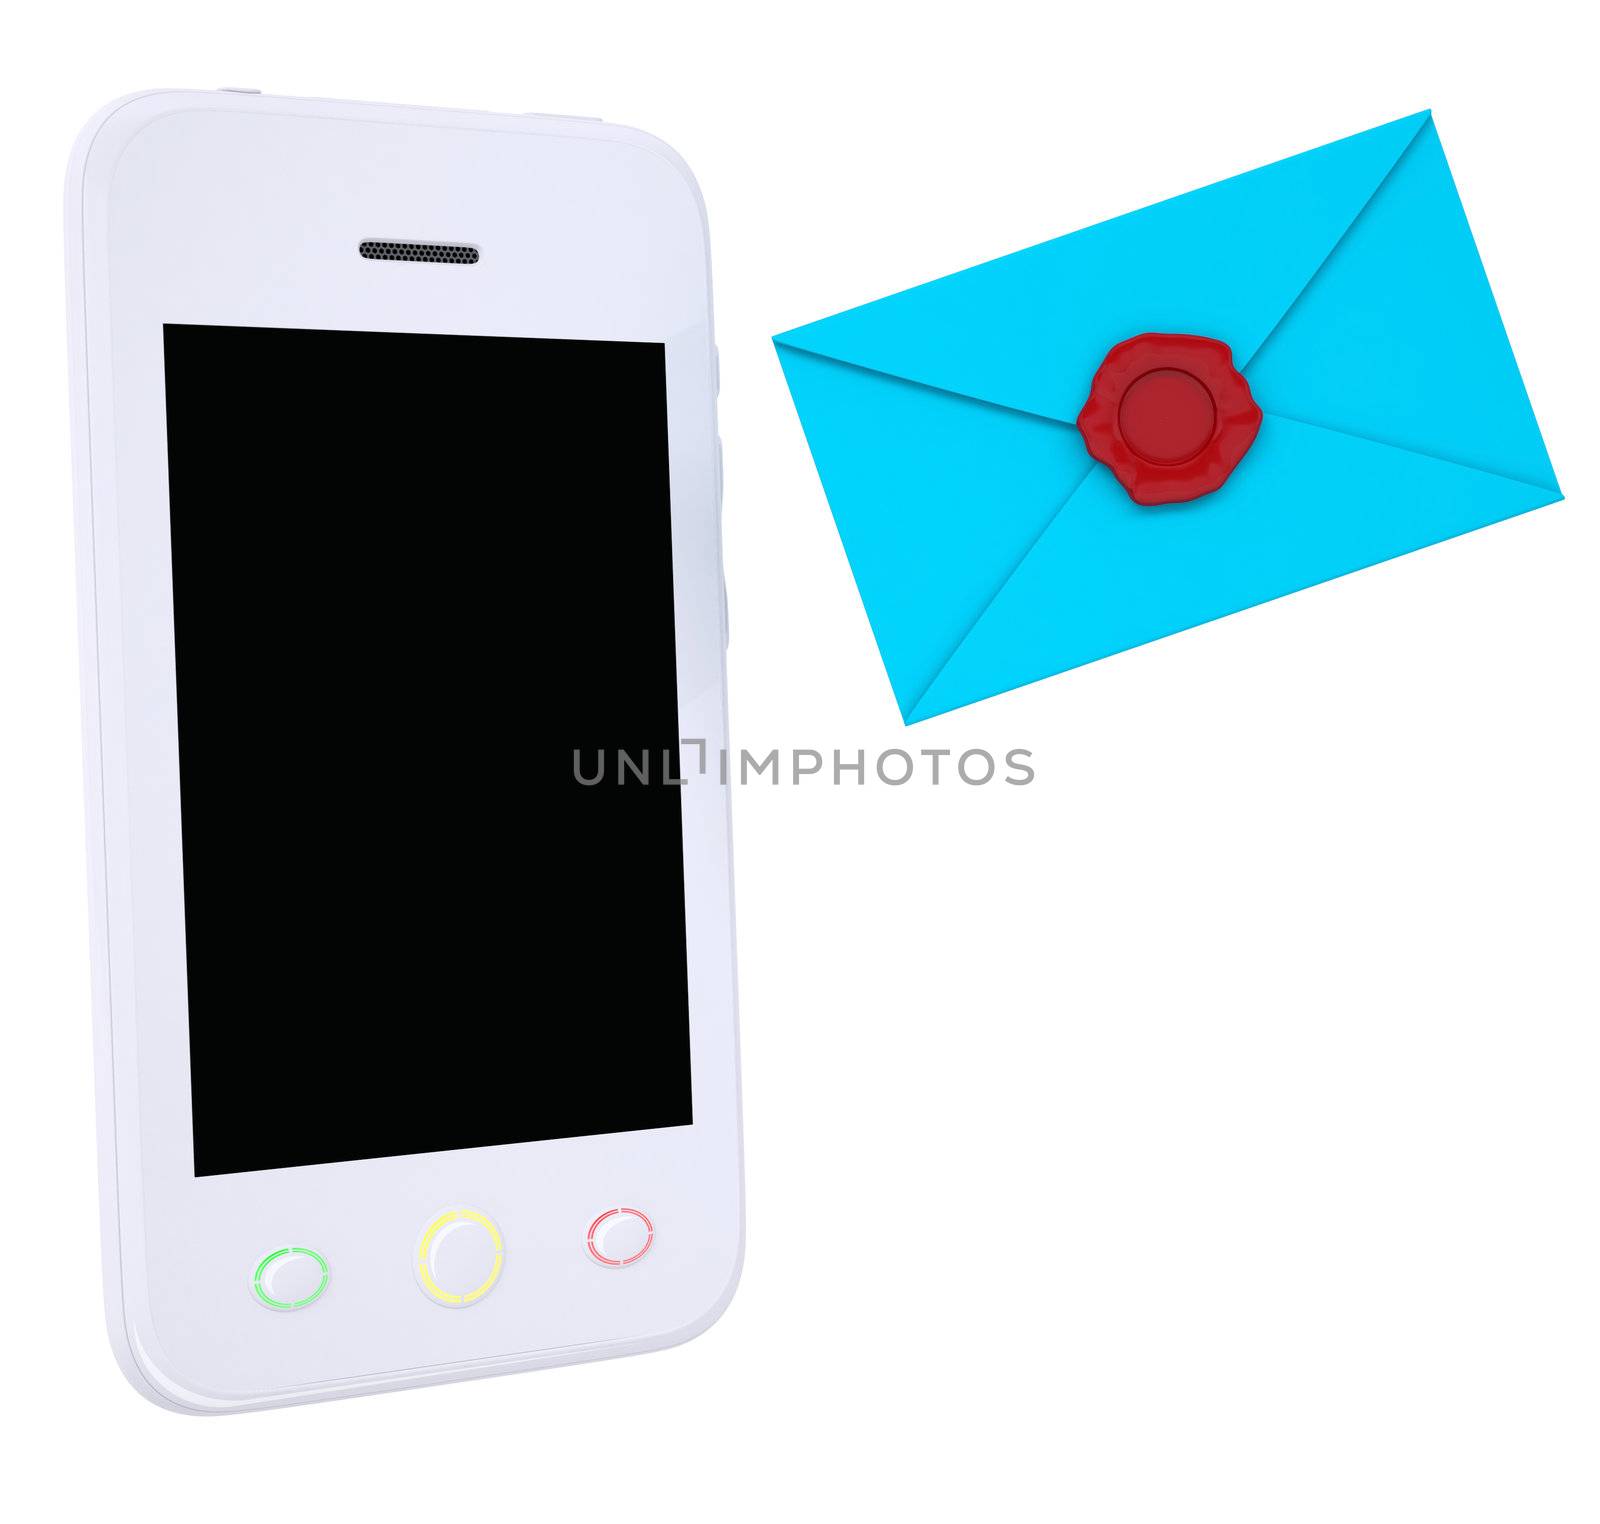 Blue envelope and smartphone. Isolated render on a white background